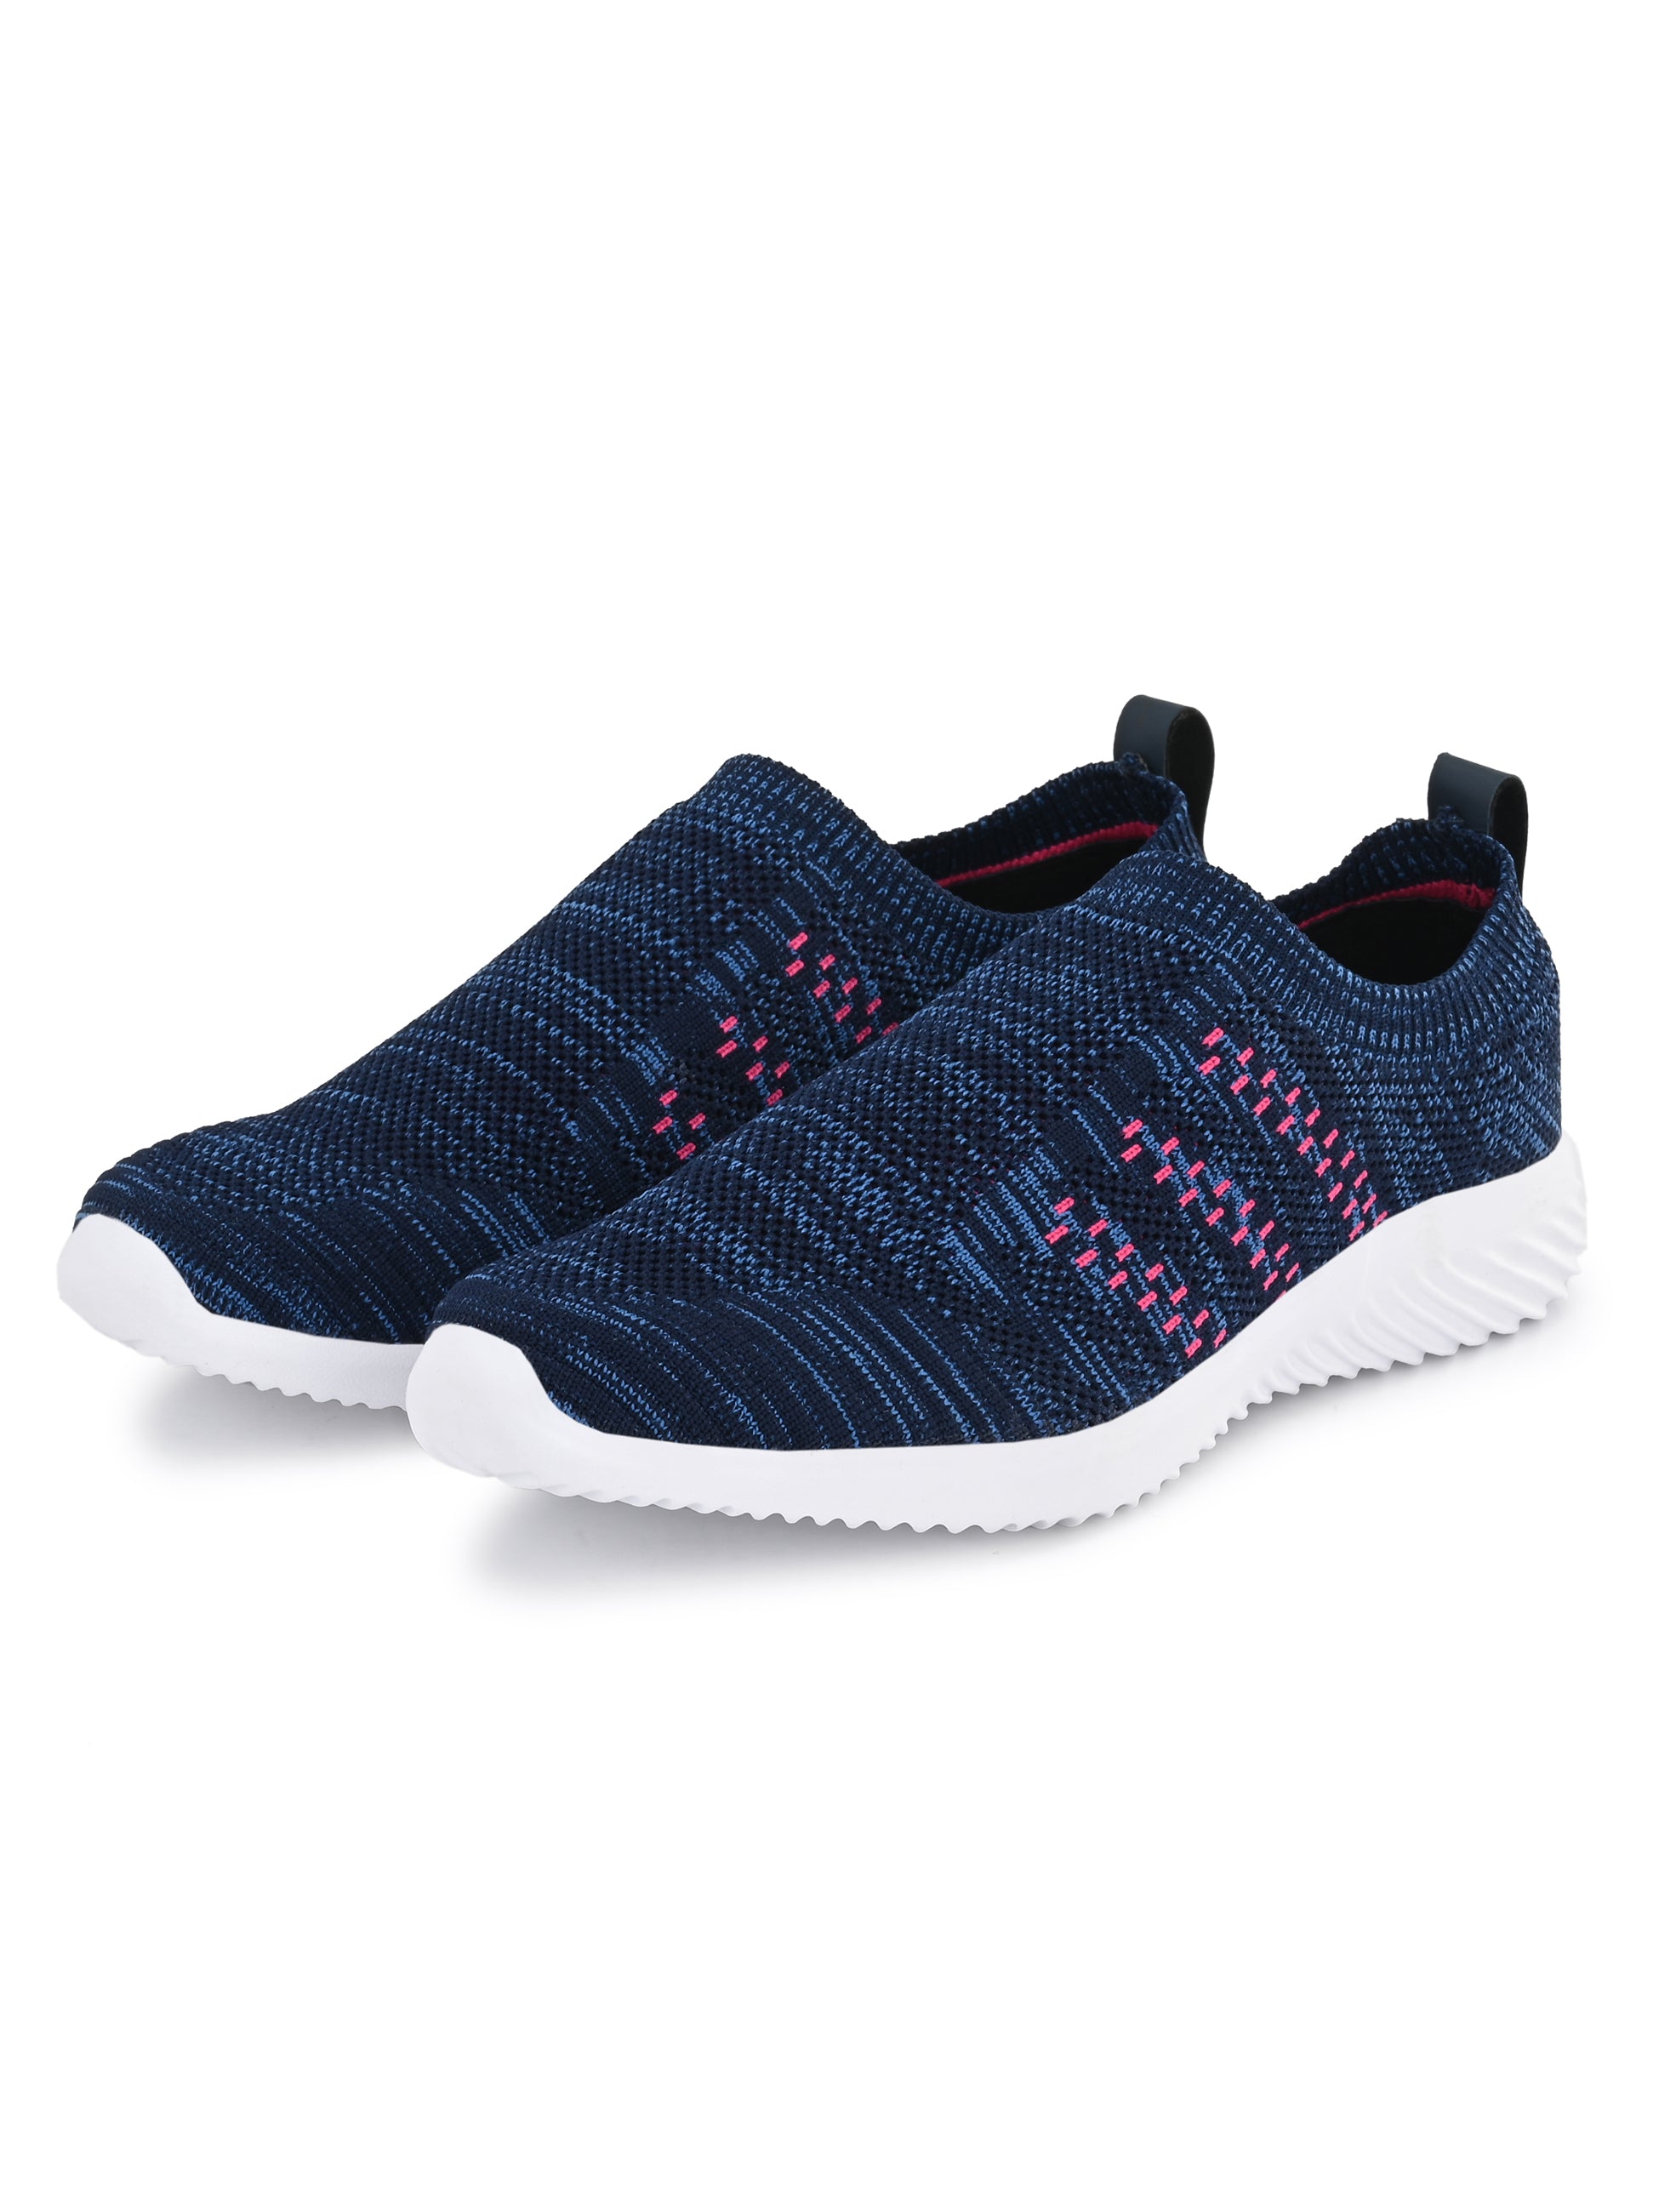 LILY 2.0 Women Running Shoes